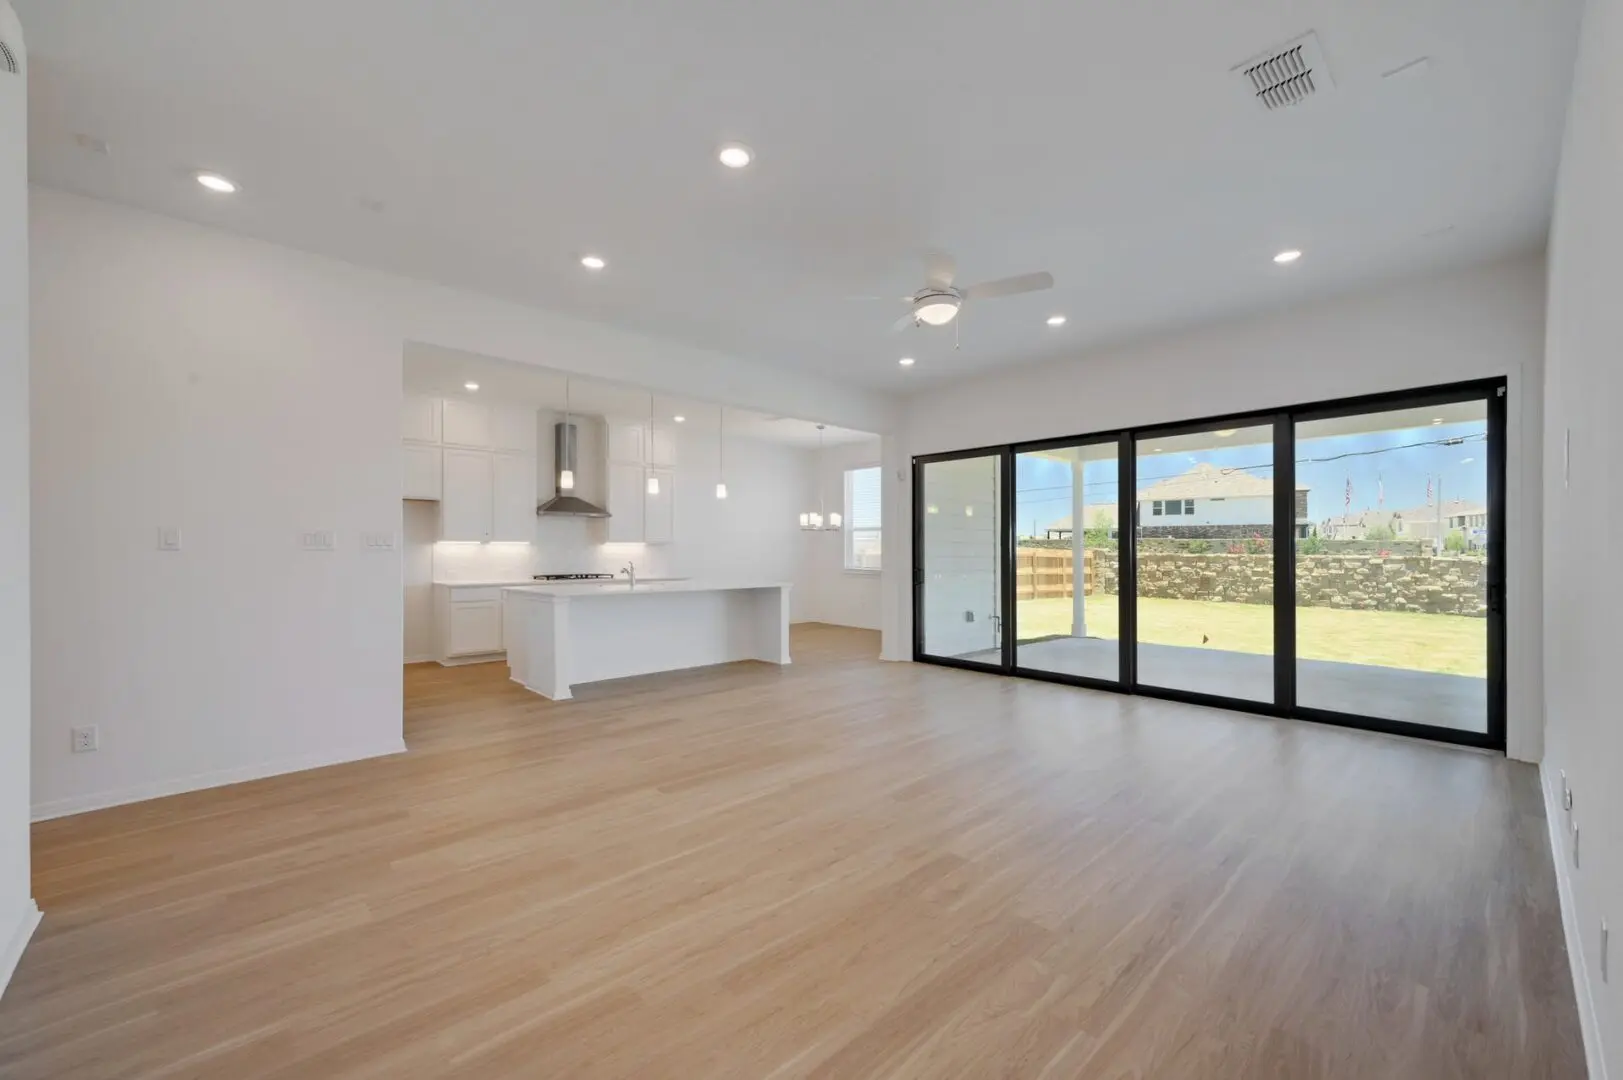 An empty living room with hardwood floors and sliding glass doors.